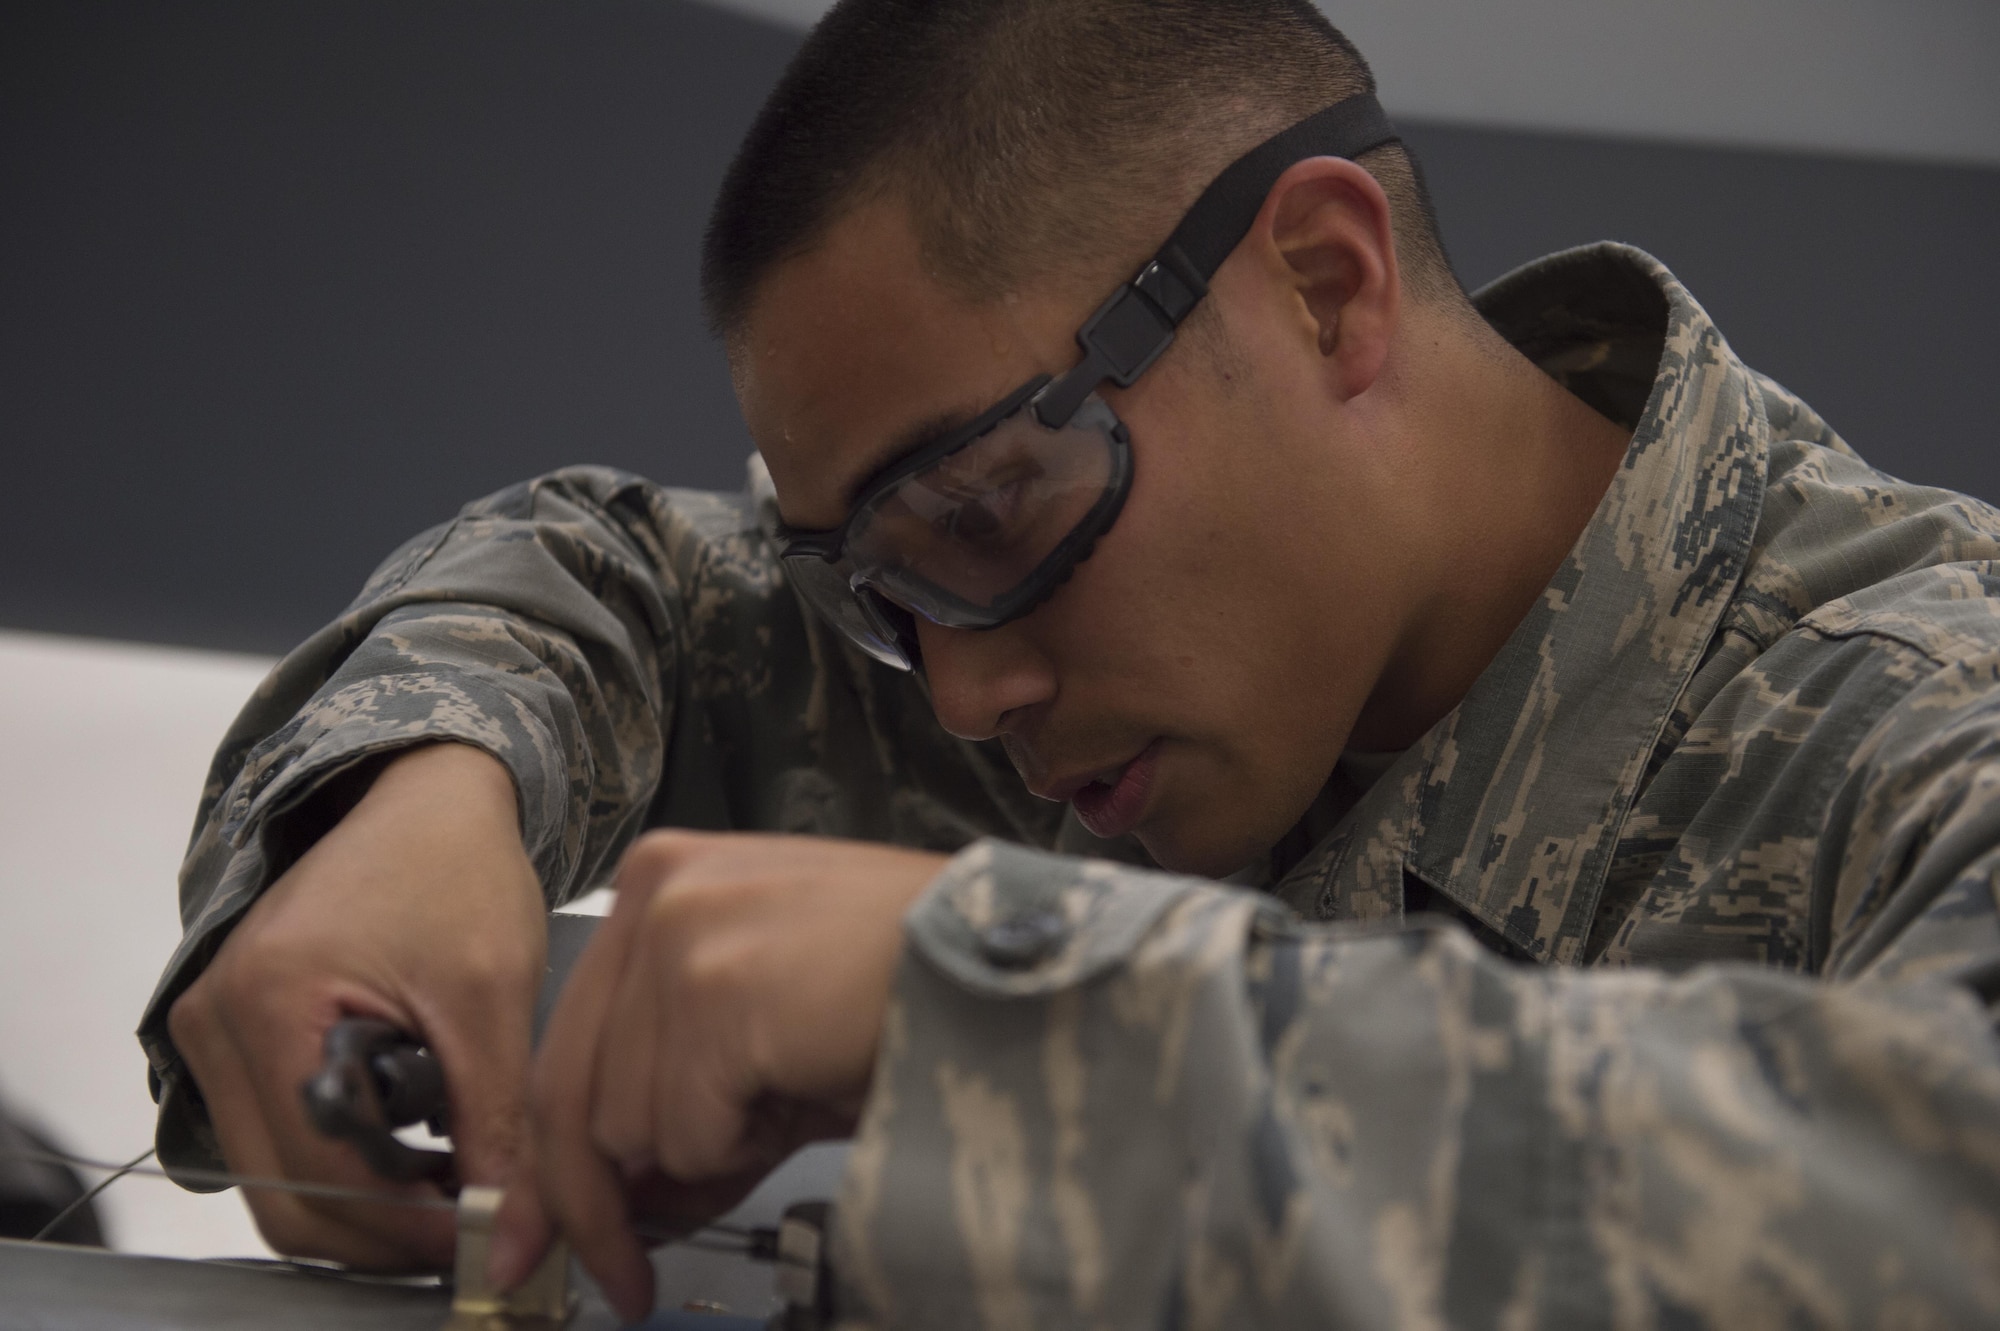 Airman 1st Class Daniel, an MQ-9 Reaper weapons load crew member, prepares an inert munition before loading it onto an MQ-9 Reaper during a quarterly load crew competition at Holloman Air Force Base, N.M., Jan. 20, 2016. The weapons load crews for German Air Force Tornado, F-16 Fighting Falcon and MQ-9 Reaper competed against each other to load weapons the most efficiently and with the least amount of procedural errors. Points for the competition are awarded based on weapons loading, tool kit inspection and uniform inspection categories. (U.S. Air Force photo by Senior Airman Chase Cannon/ Released)